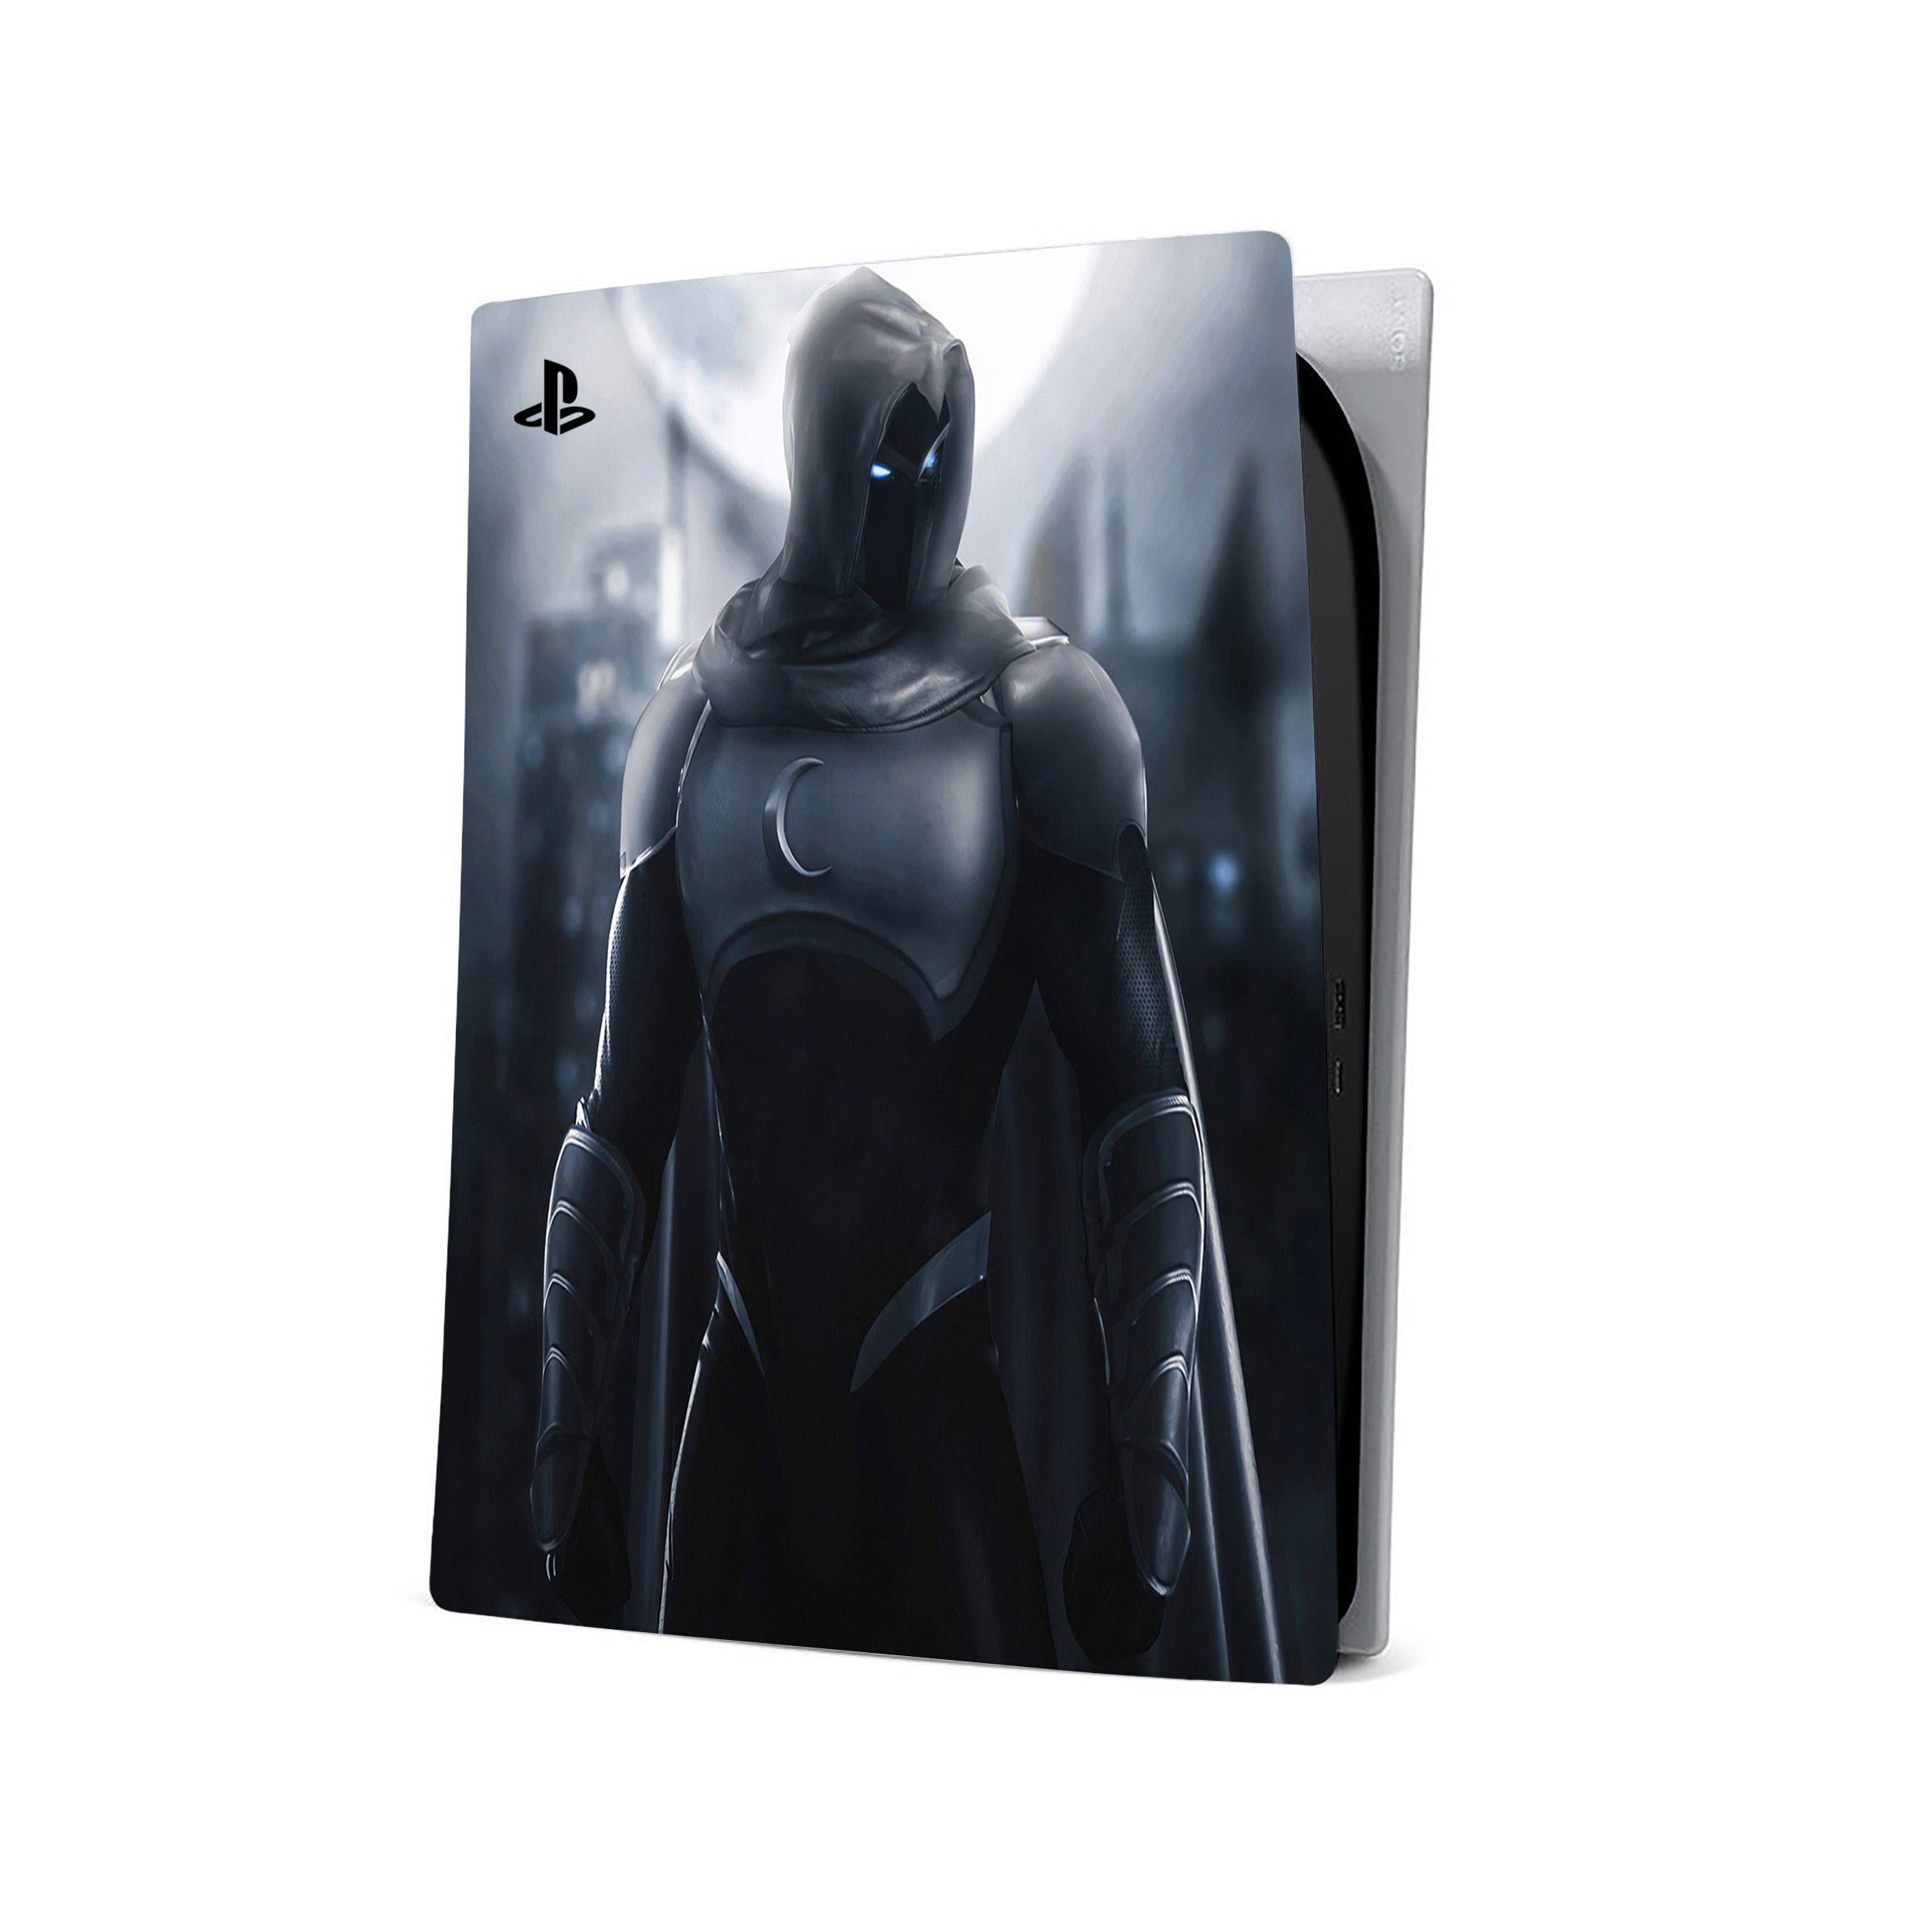 A video game skin featuring a Marvel Comics Moon Knight design for the PS5.